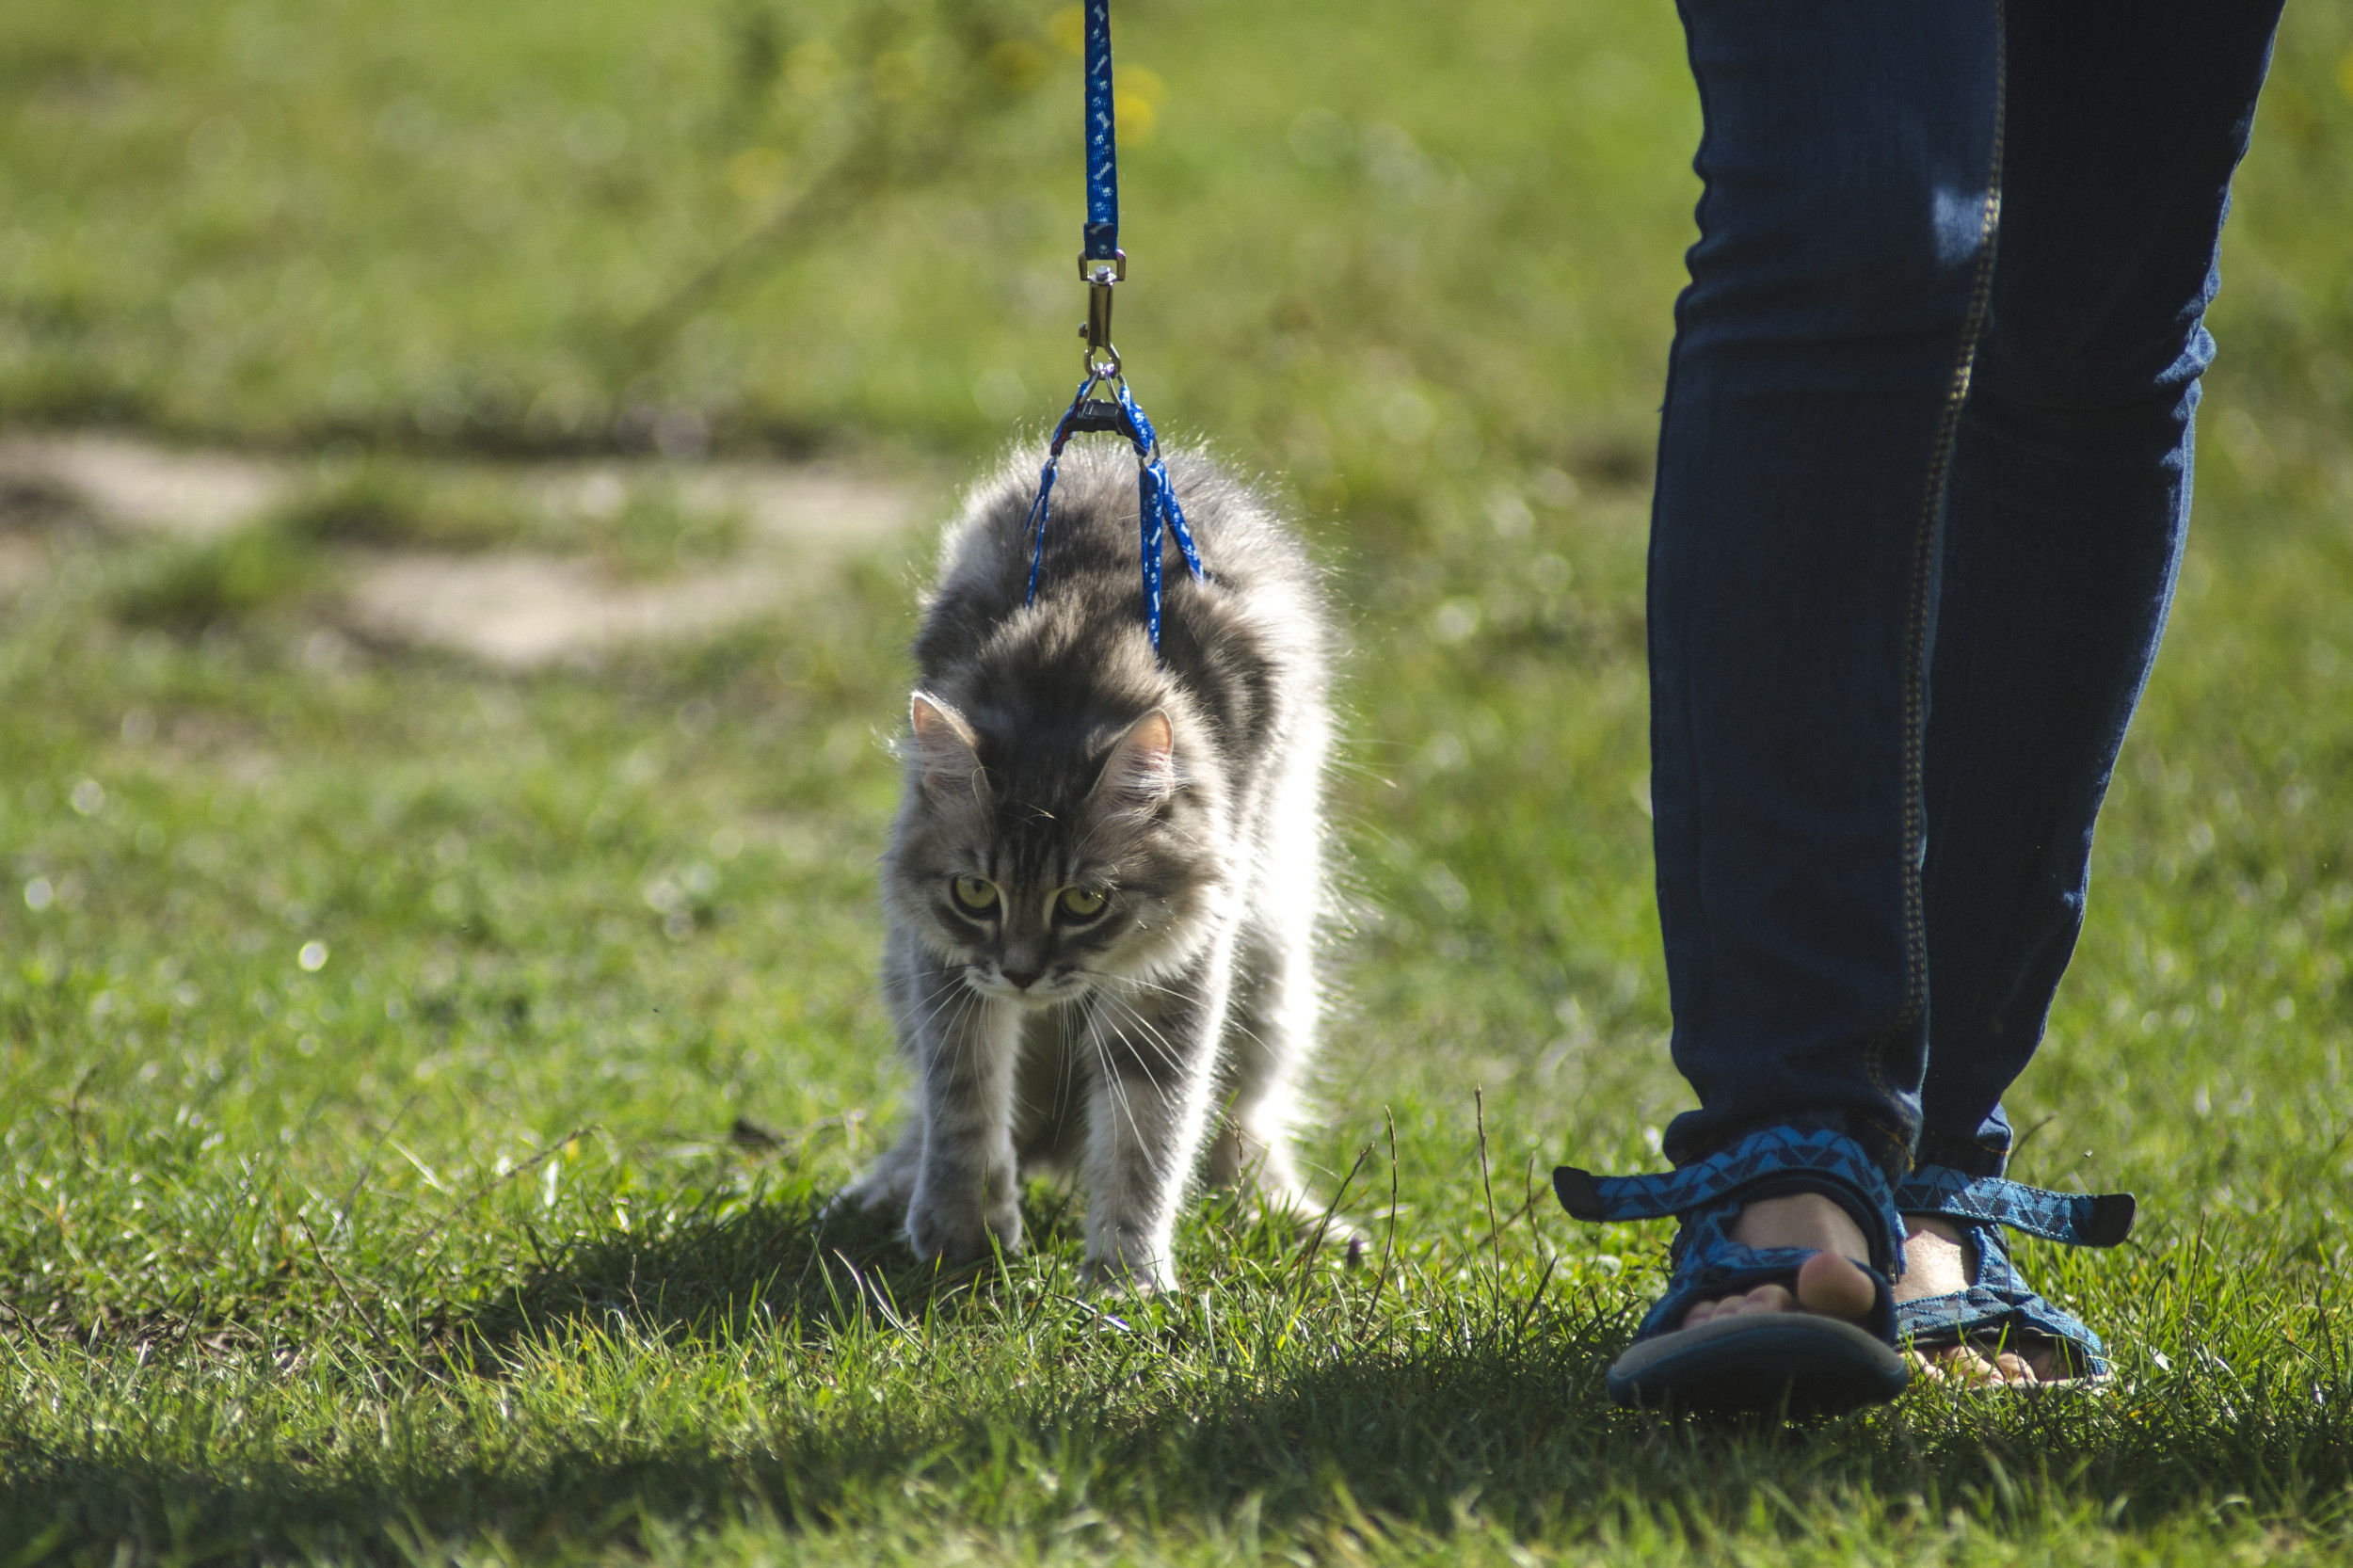 Woman Trying to Walk Cat on a Leash Goes Exactly How You Think It Would